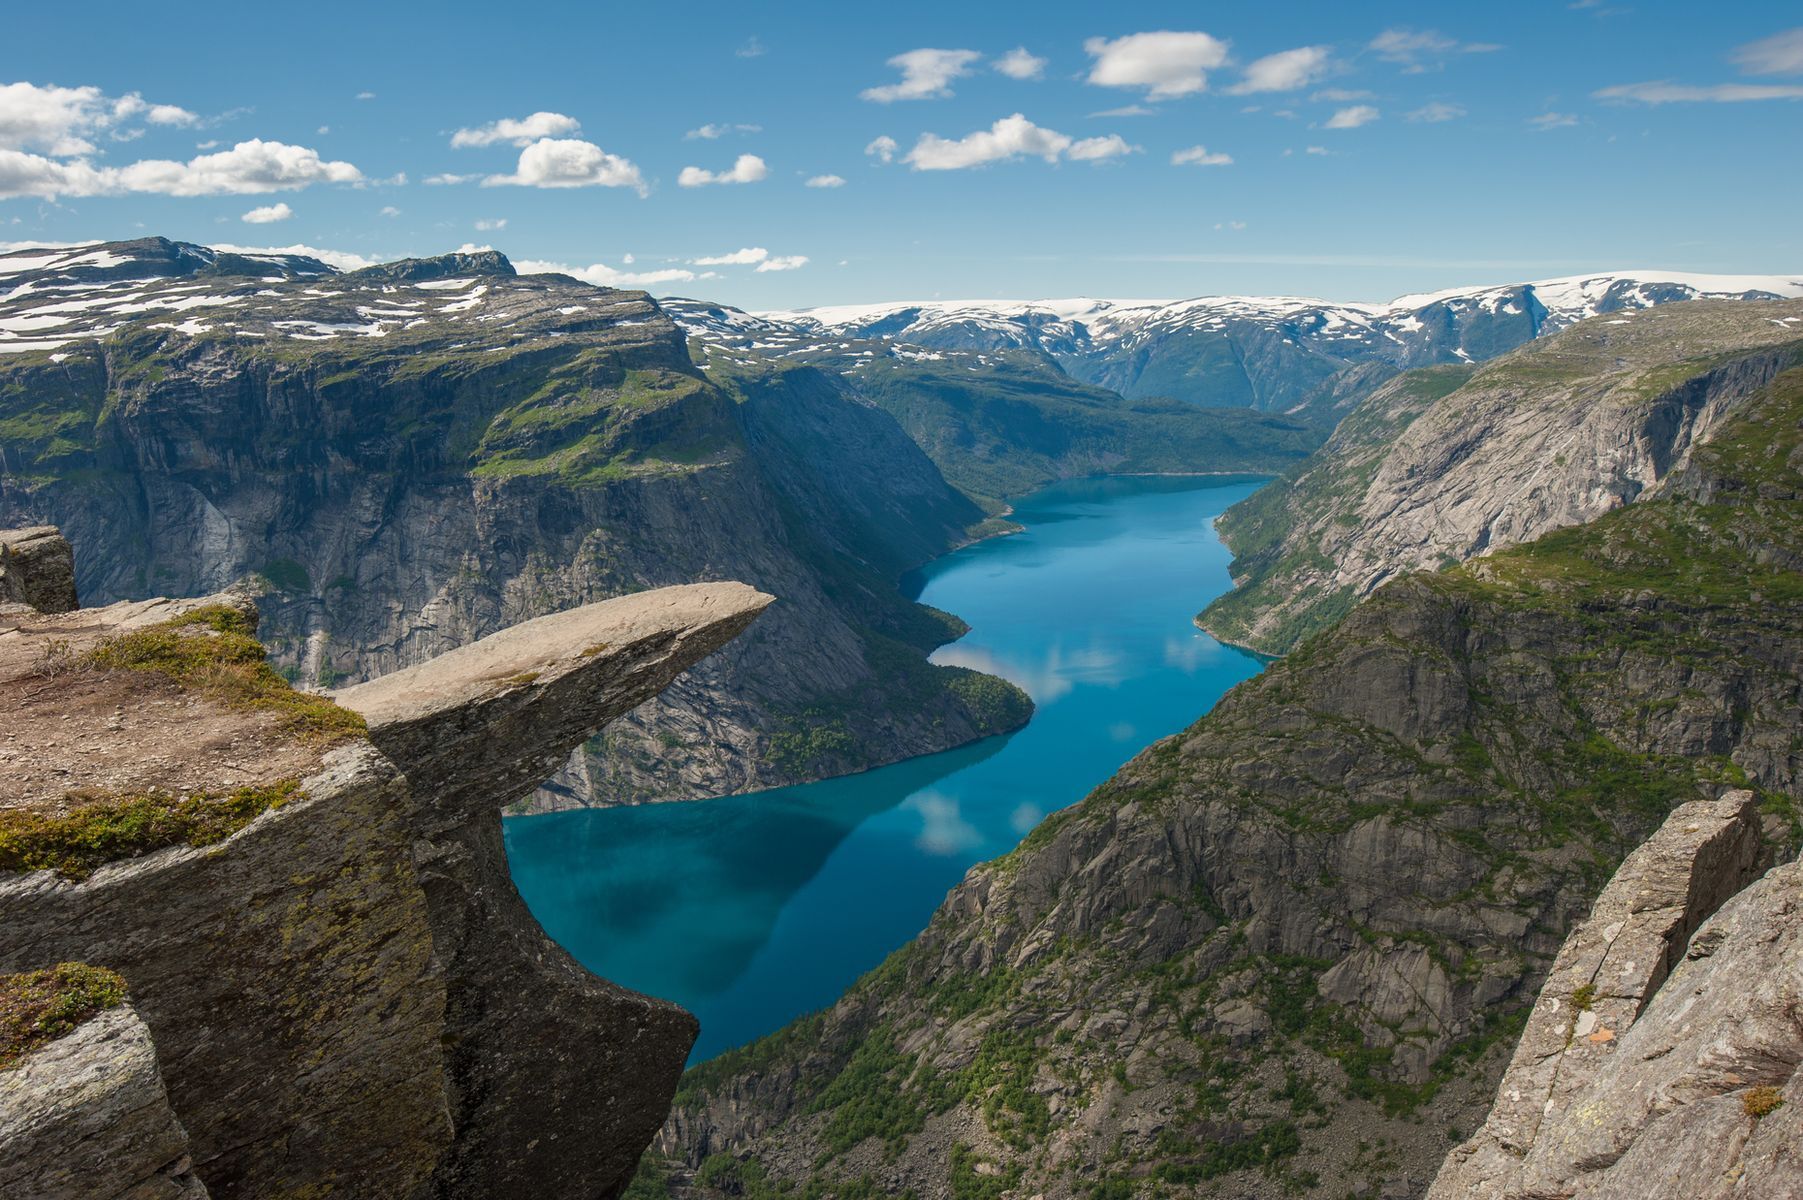 <a href="https://www.visitnorway.com/places-to-go/fjord-norway/the-hardangerfjord-region/hiking-to-trolltunga/?lang=usa" rel="noreferrer noopener">Trolltunga</a> is an iconic natural wonder that draws intrepid travellers from all over the world to Norway. Impressive rock formations overlooking Lake Ringedalsvatnet and the surrounding mountains are the stuff of dreams for many an adventurer. Weather conditions, however, can make reaching this enchanting site somewhat dangerous, so the presence of a guide is strongly recommended and even compulsory between October 1 and May 31. Some preparation is also suggested as this 27-kilometre (17-mile) hike usually takes between 10 and 12 hours to complete.